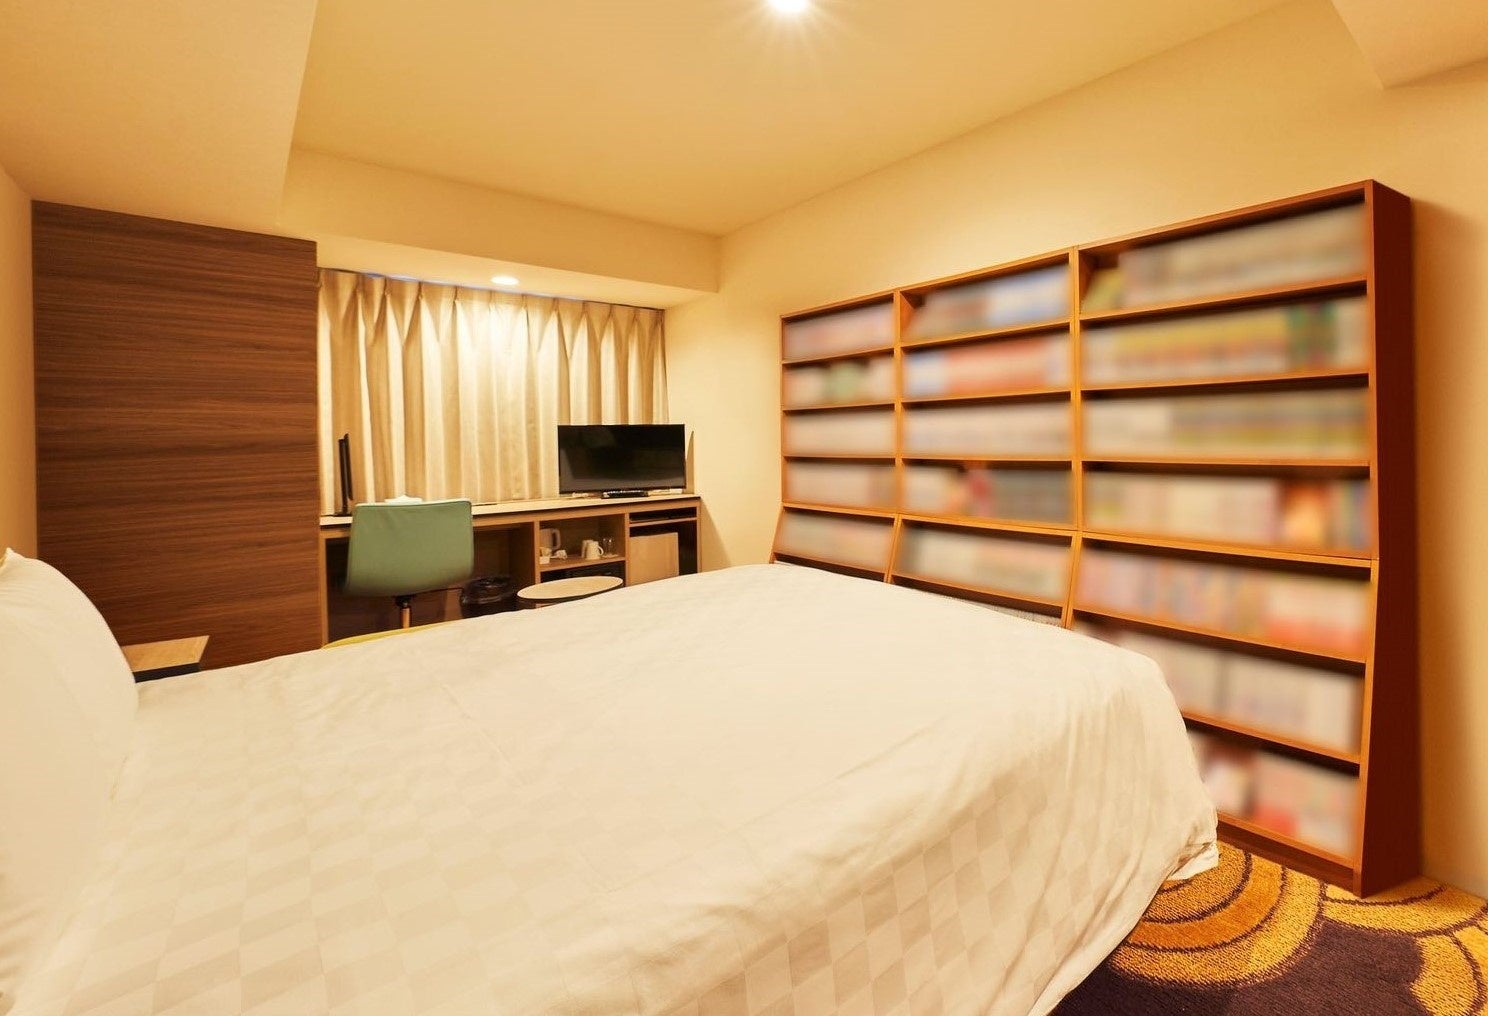 Image of a guest room stocked with BL comics